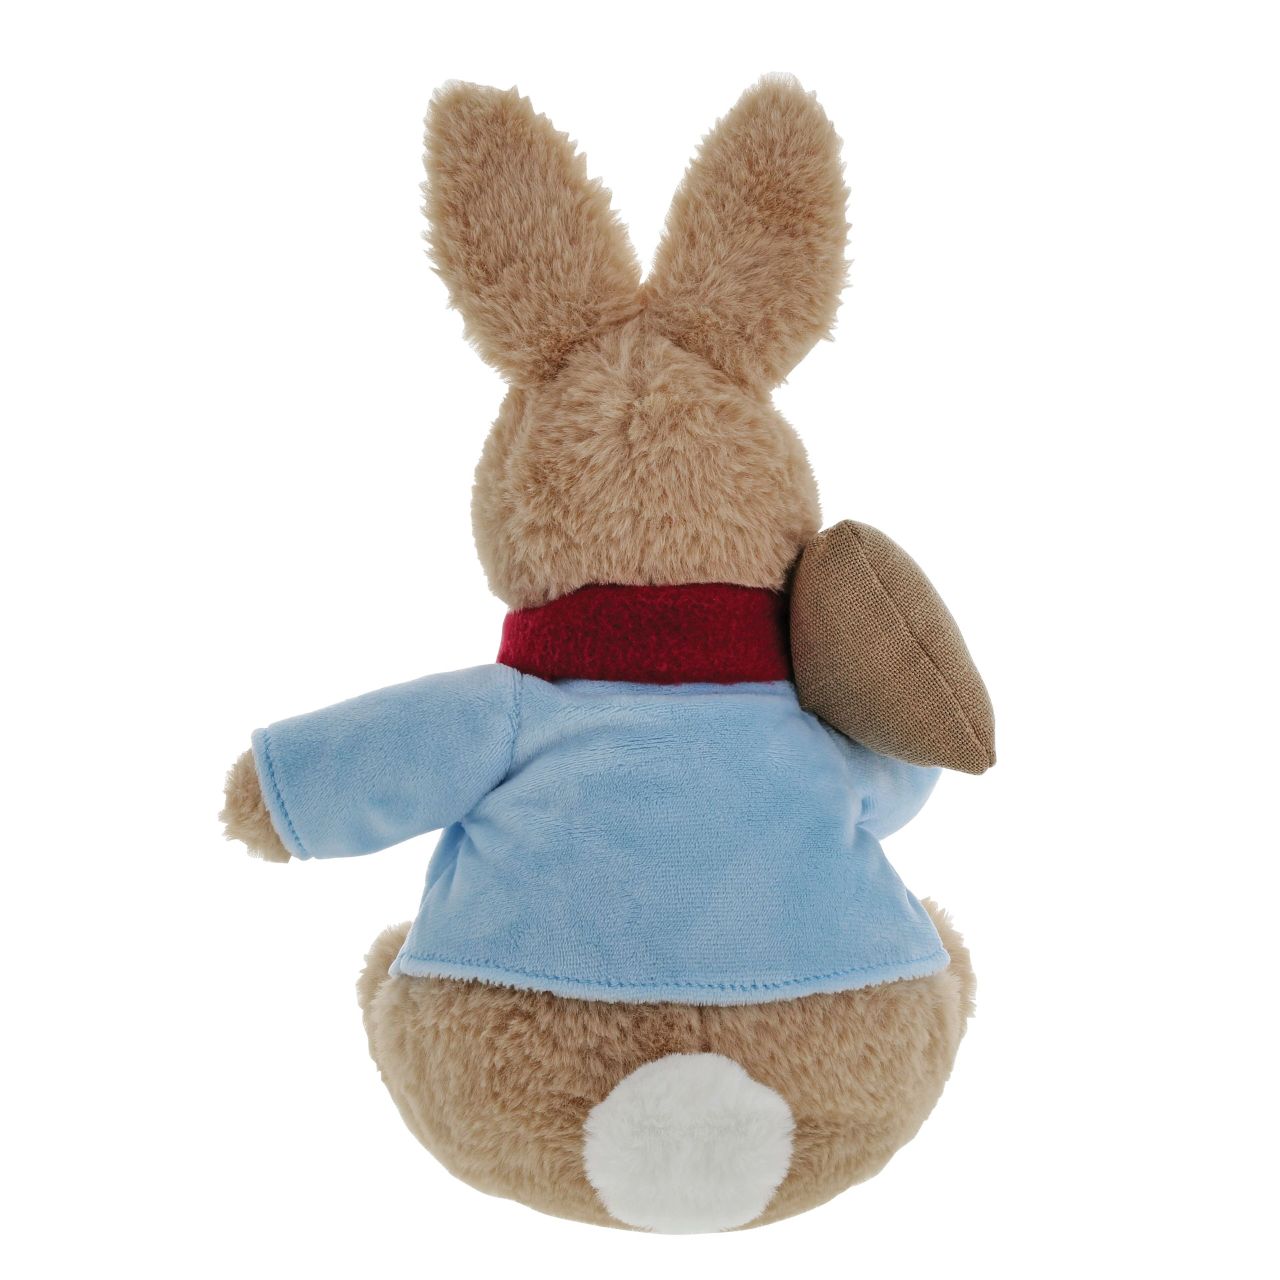 Peter Rabbit Christmas Large  We've added a touch of Christmas sparkle to our Peter Rabbit soft you. This Peter Rabbit will make the perfect keepsake for anyone who loves Christmas and the festivities it brings. A gift that isn't just for little ones, but for grownups too.